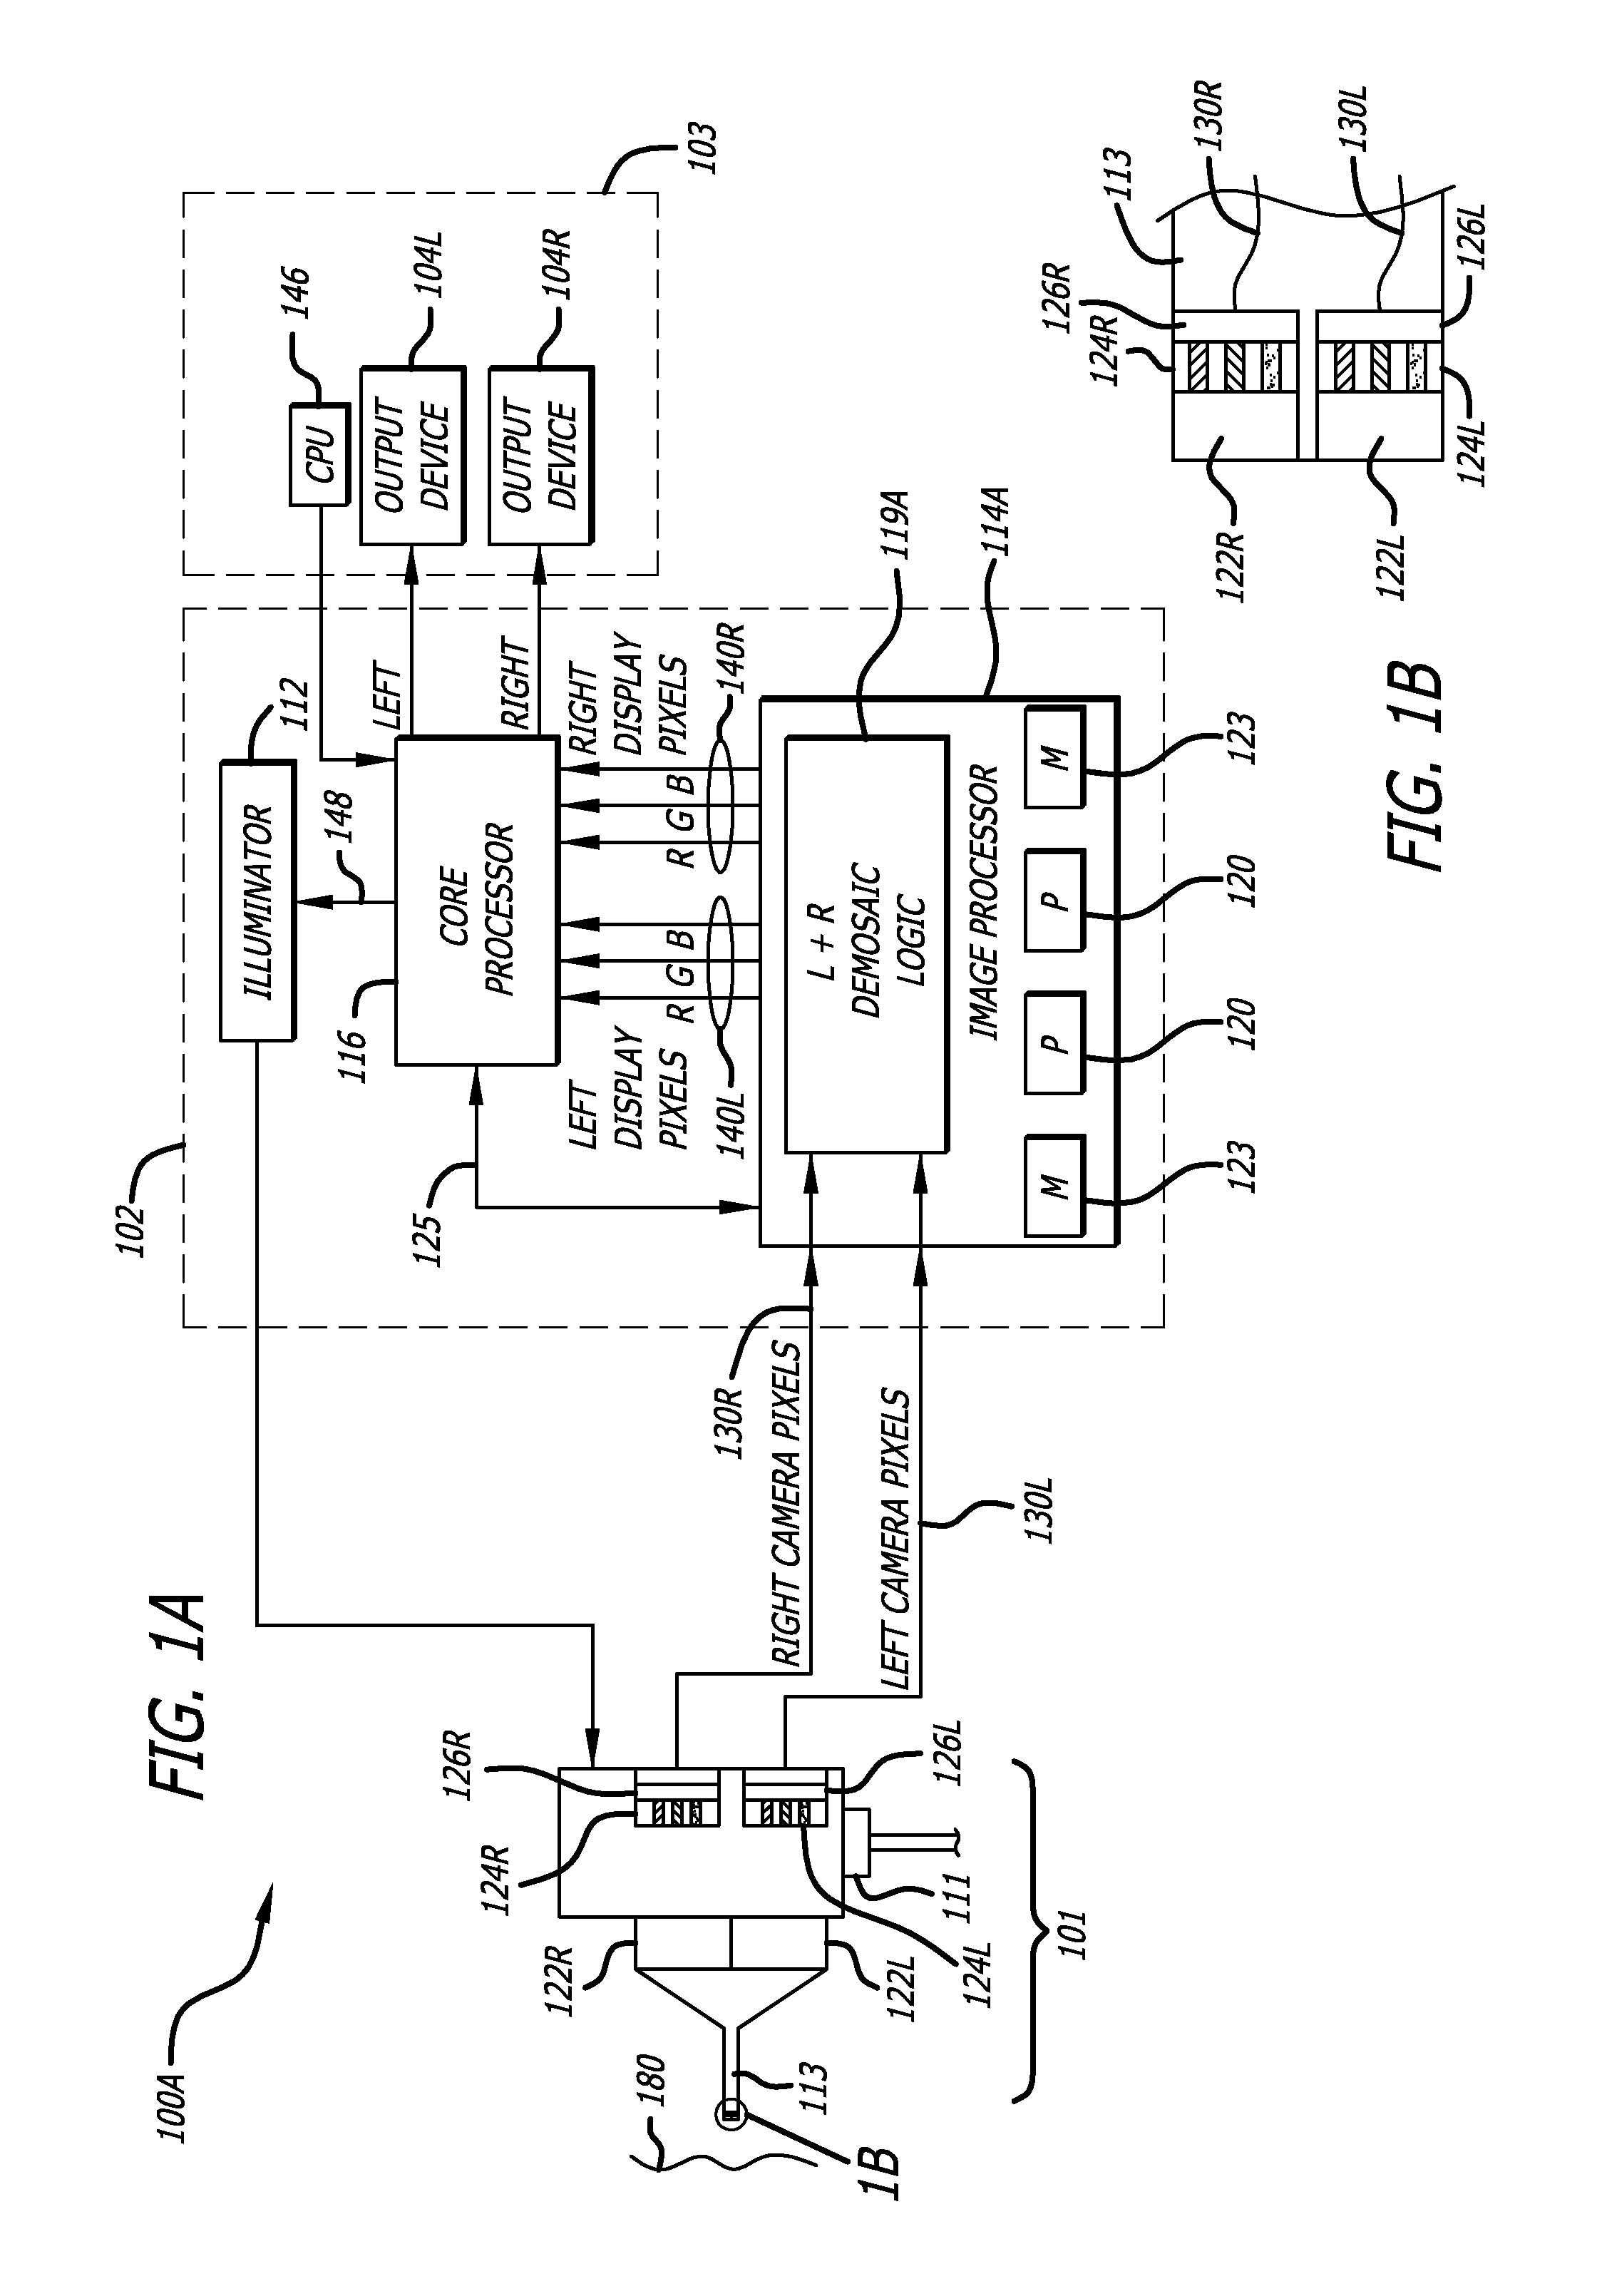 Methods and apparatus for demosaicing images with highly correlated color channels